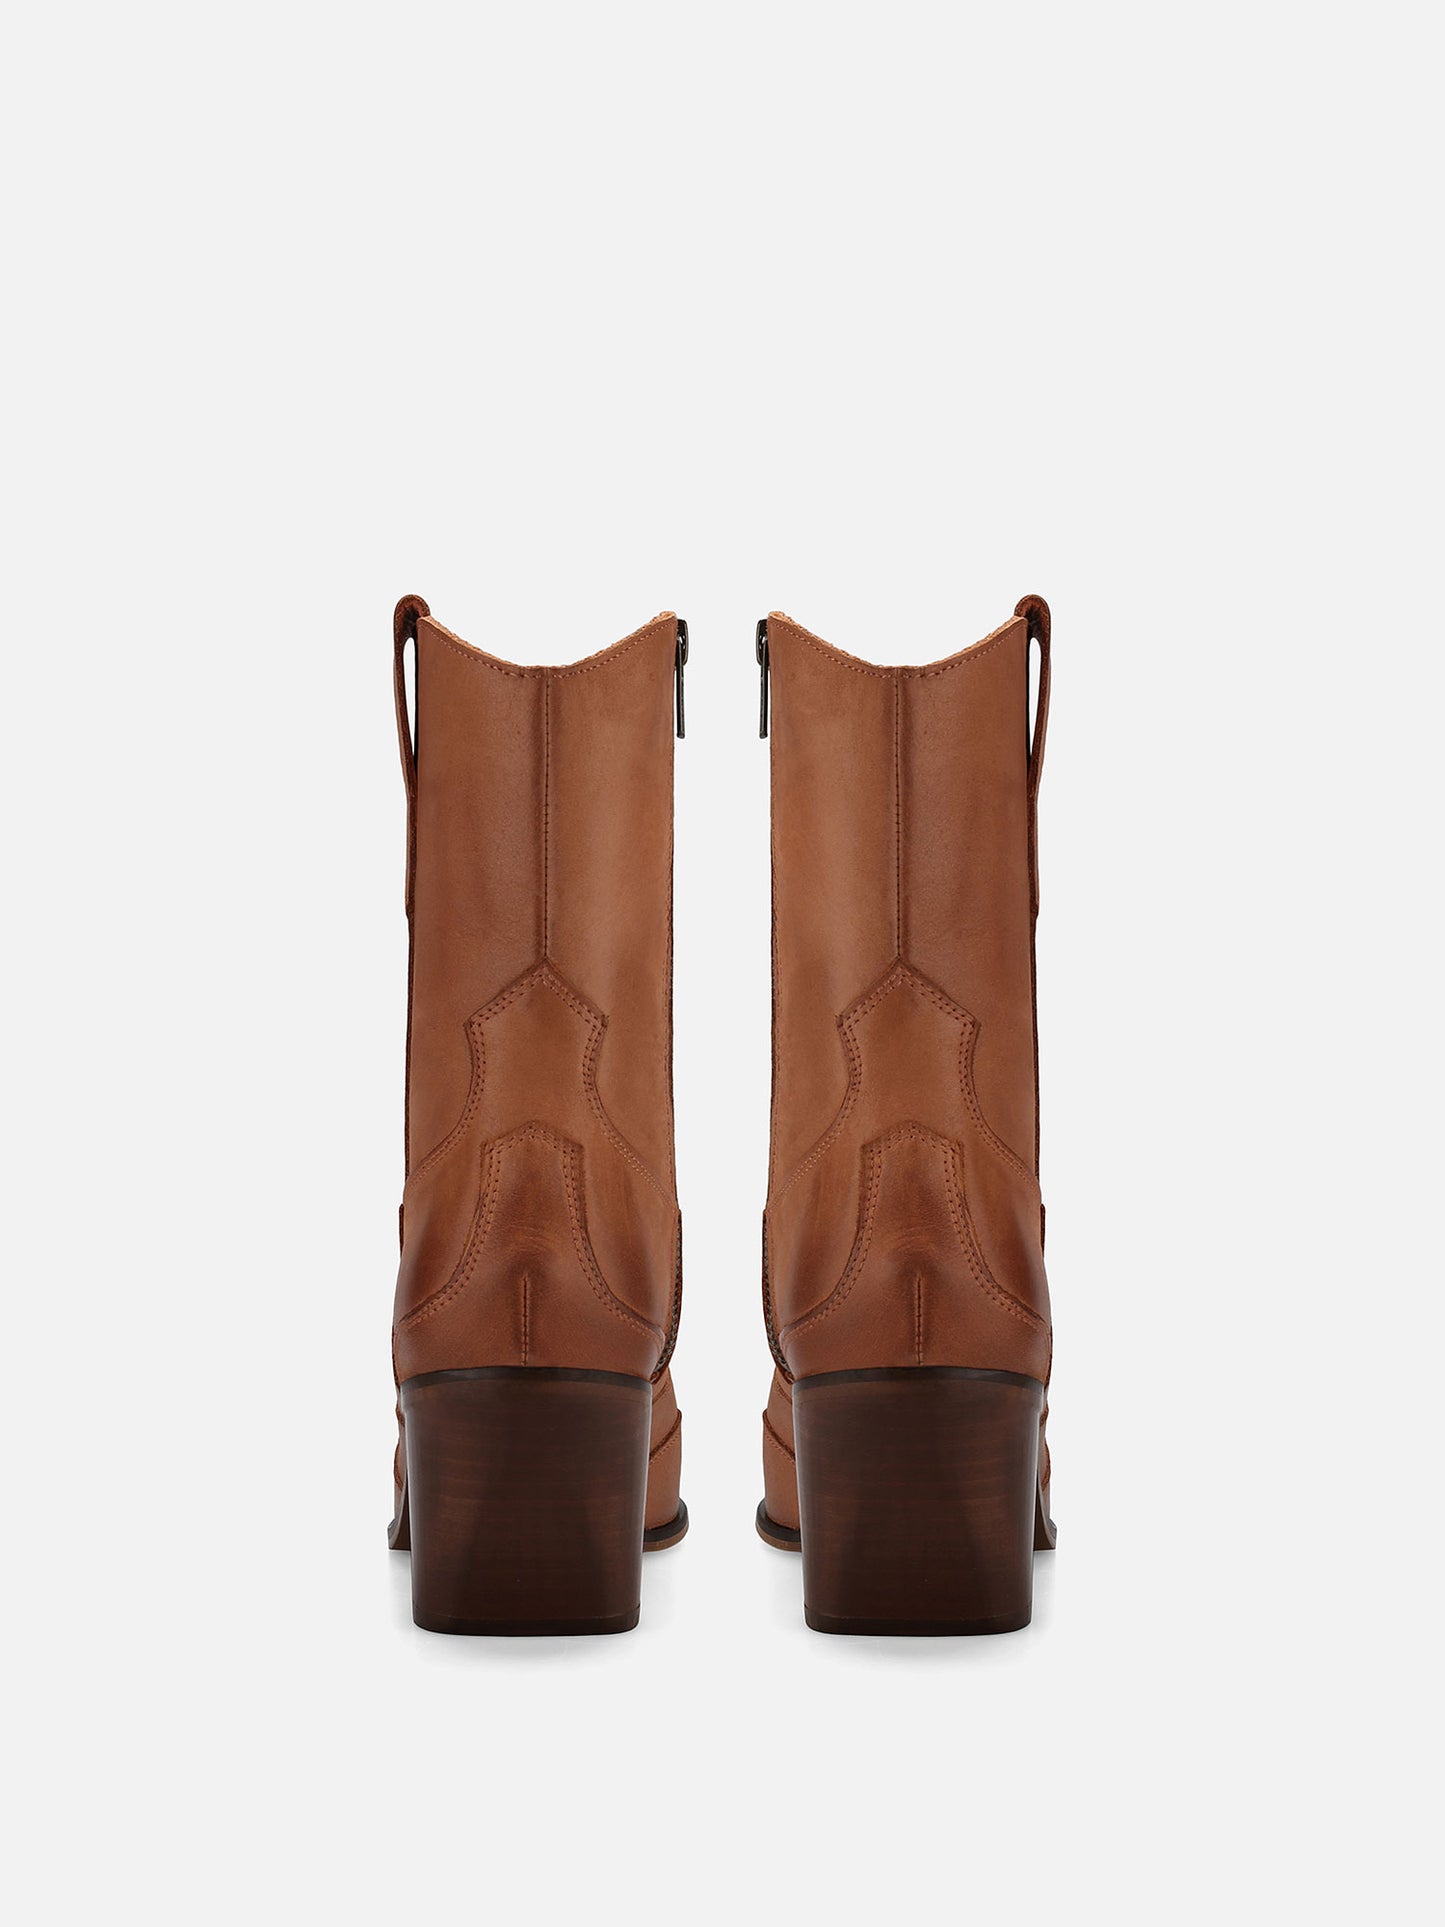 TABITOX Western Leather Boots - Cognac